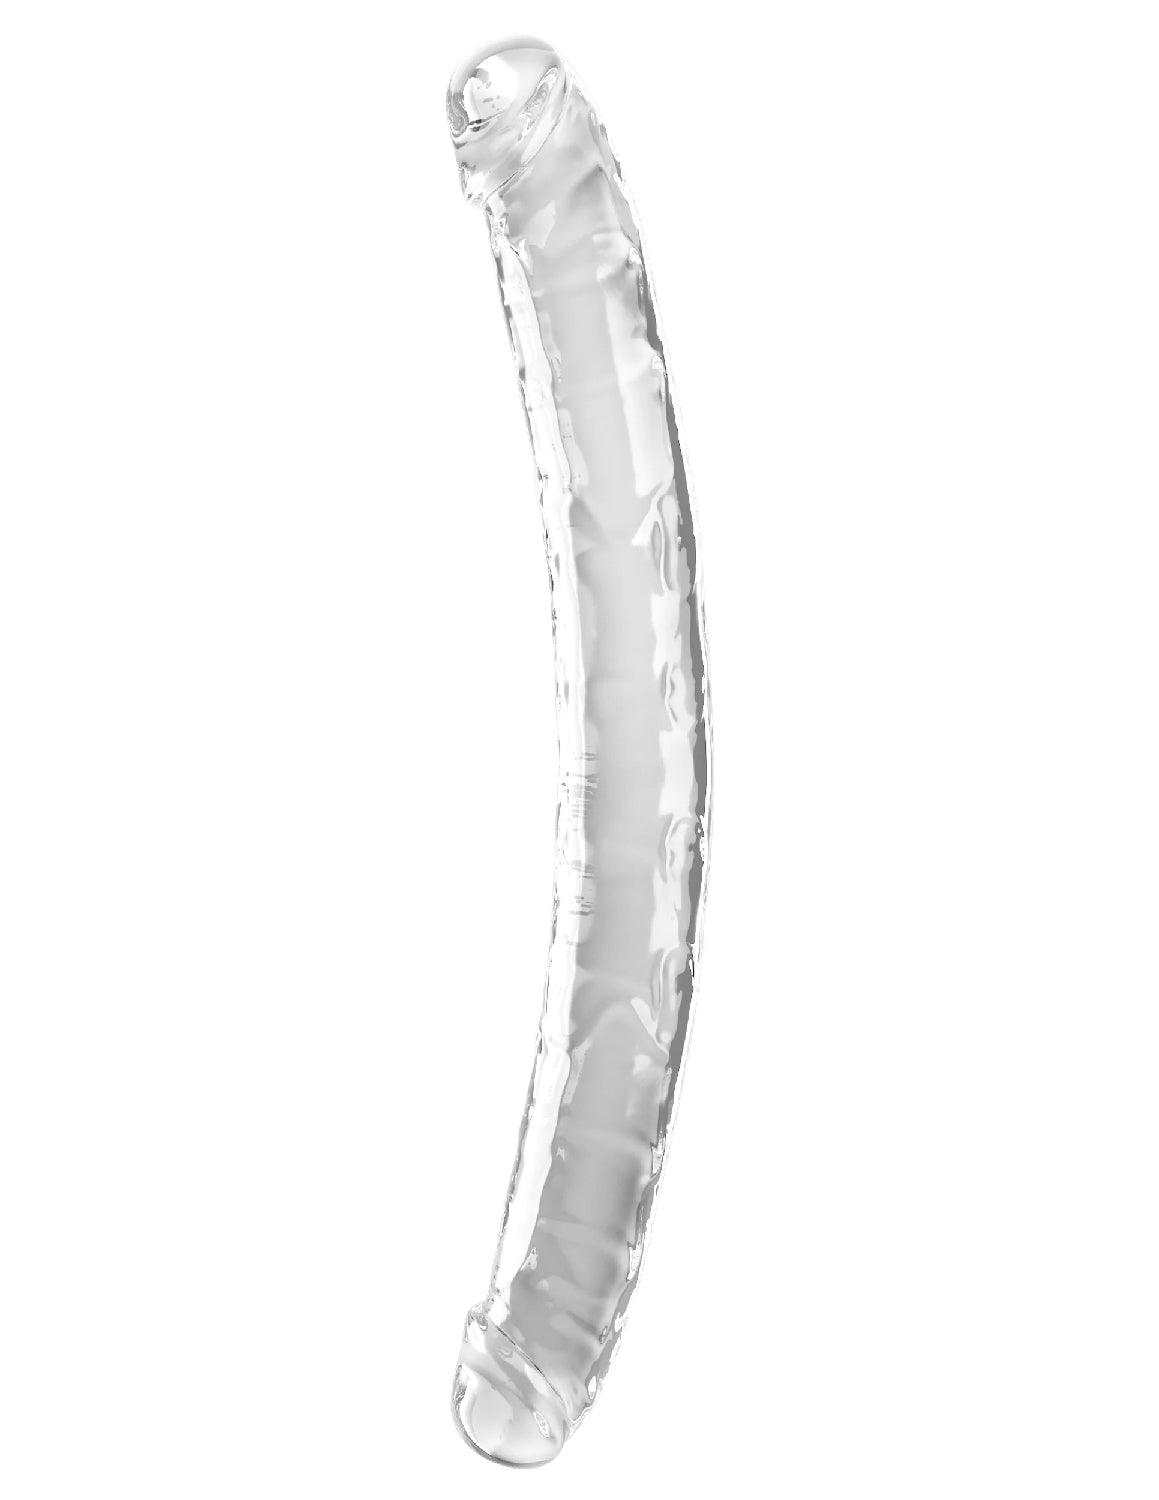 18 Inch Double Dildo - Clear - My Sex Toy Hub